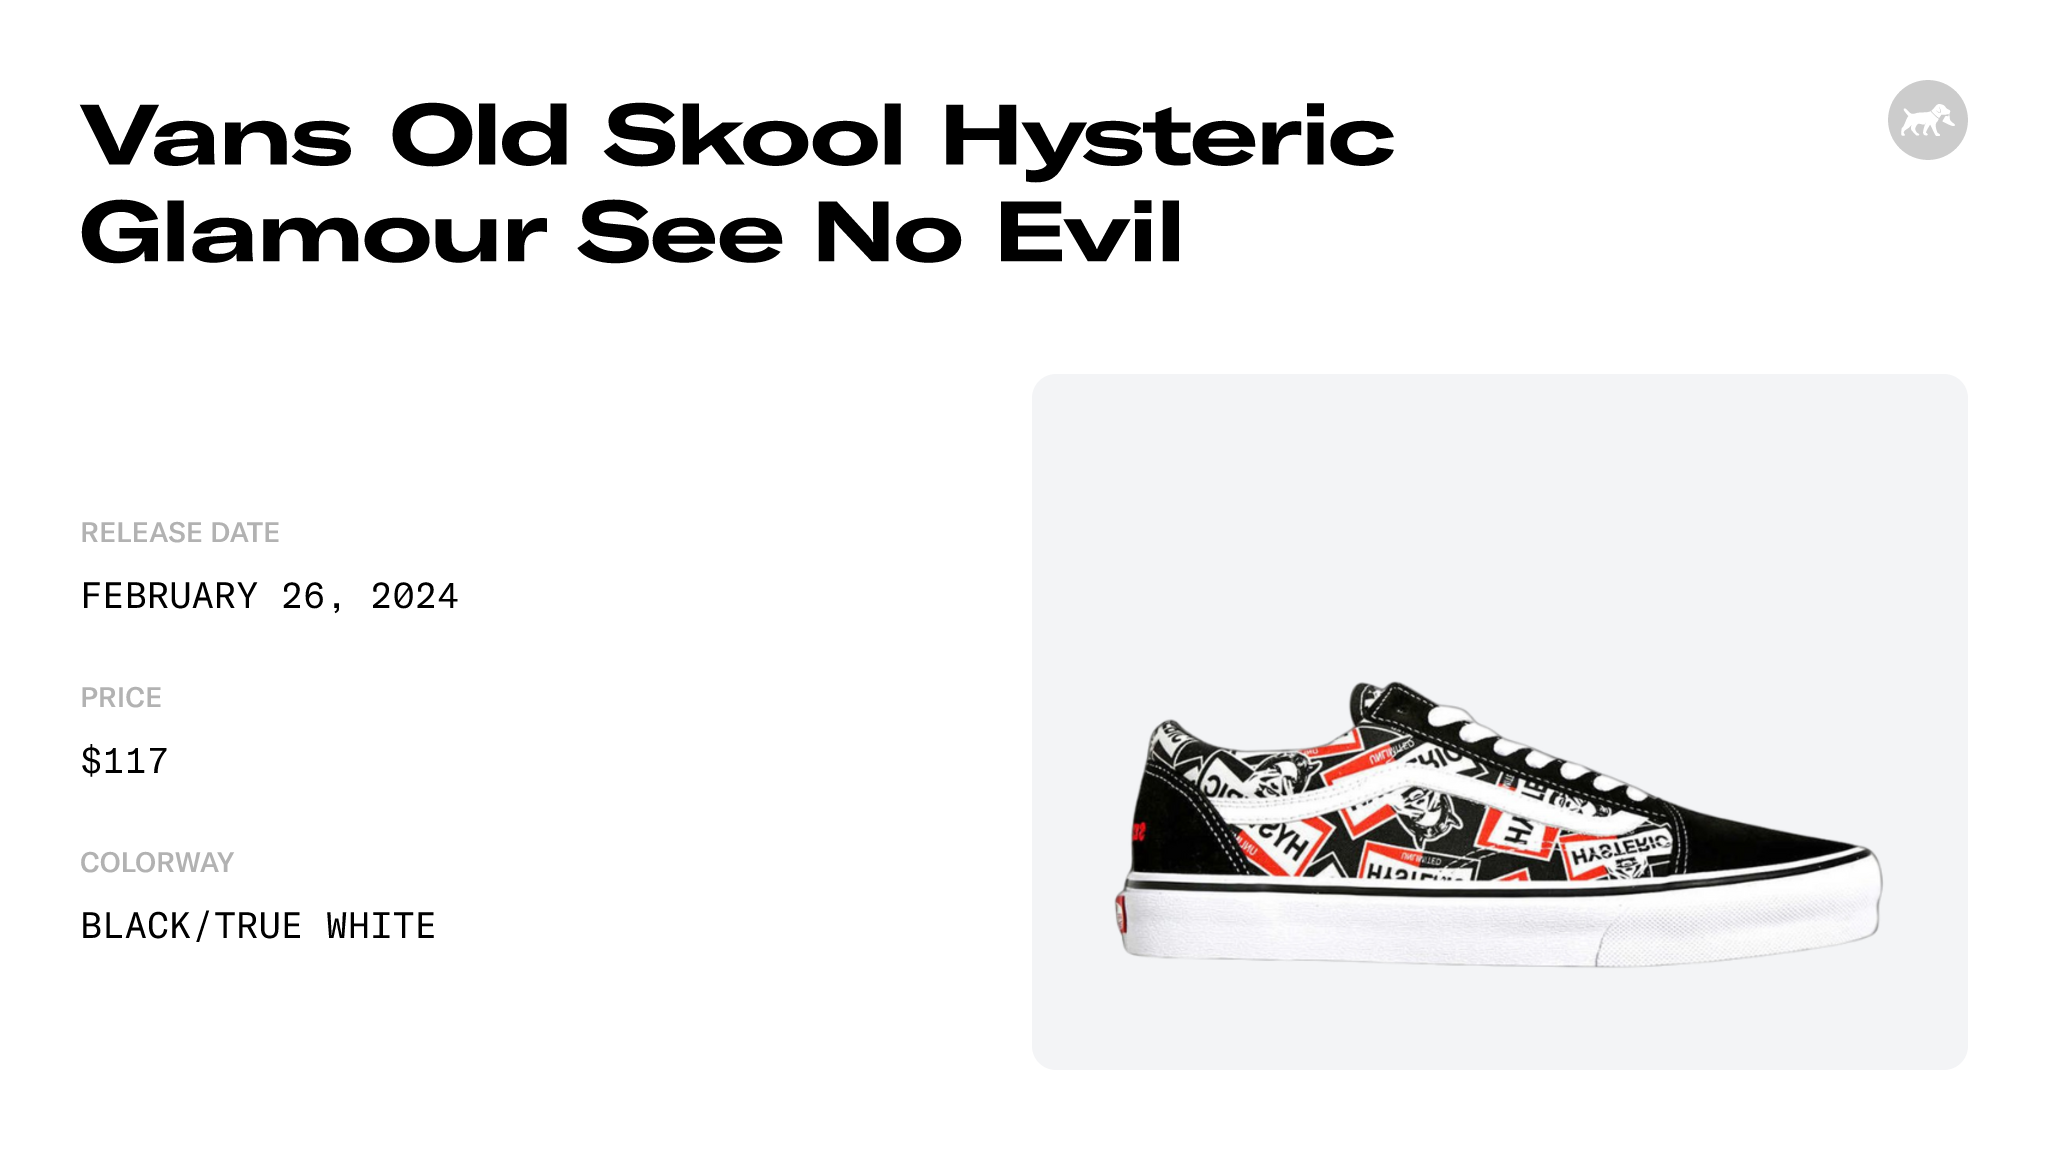 Vans Old Skool Hysteric Glamour See No Evil Raffles and Release Date